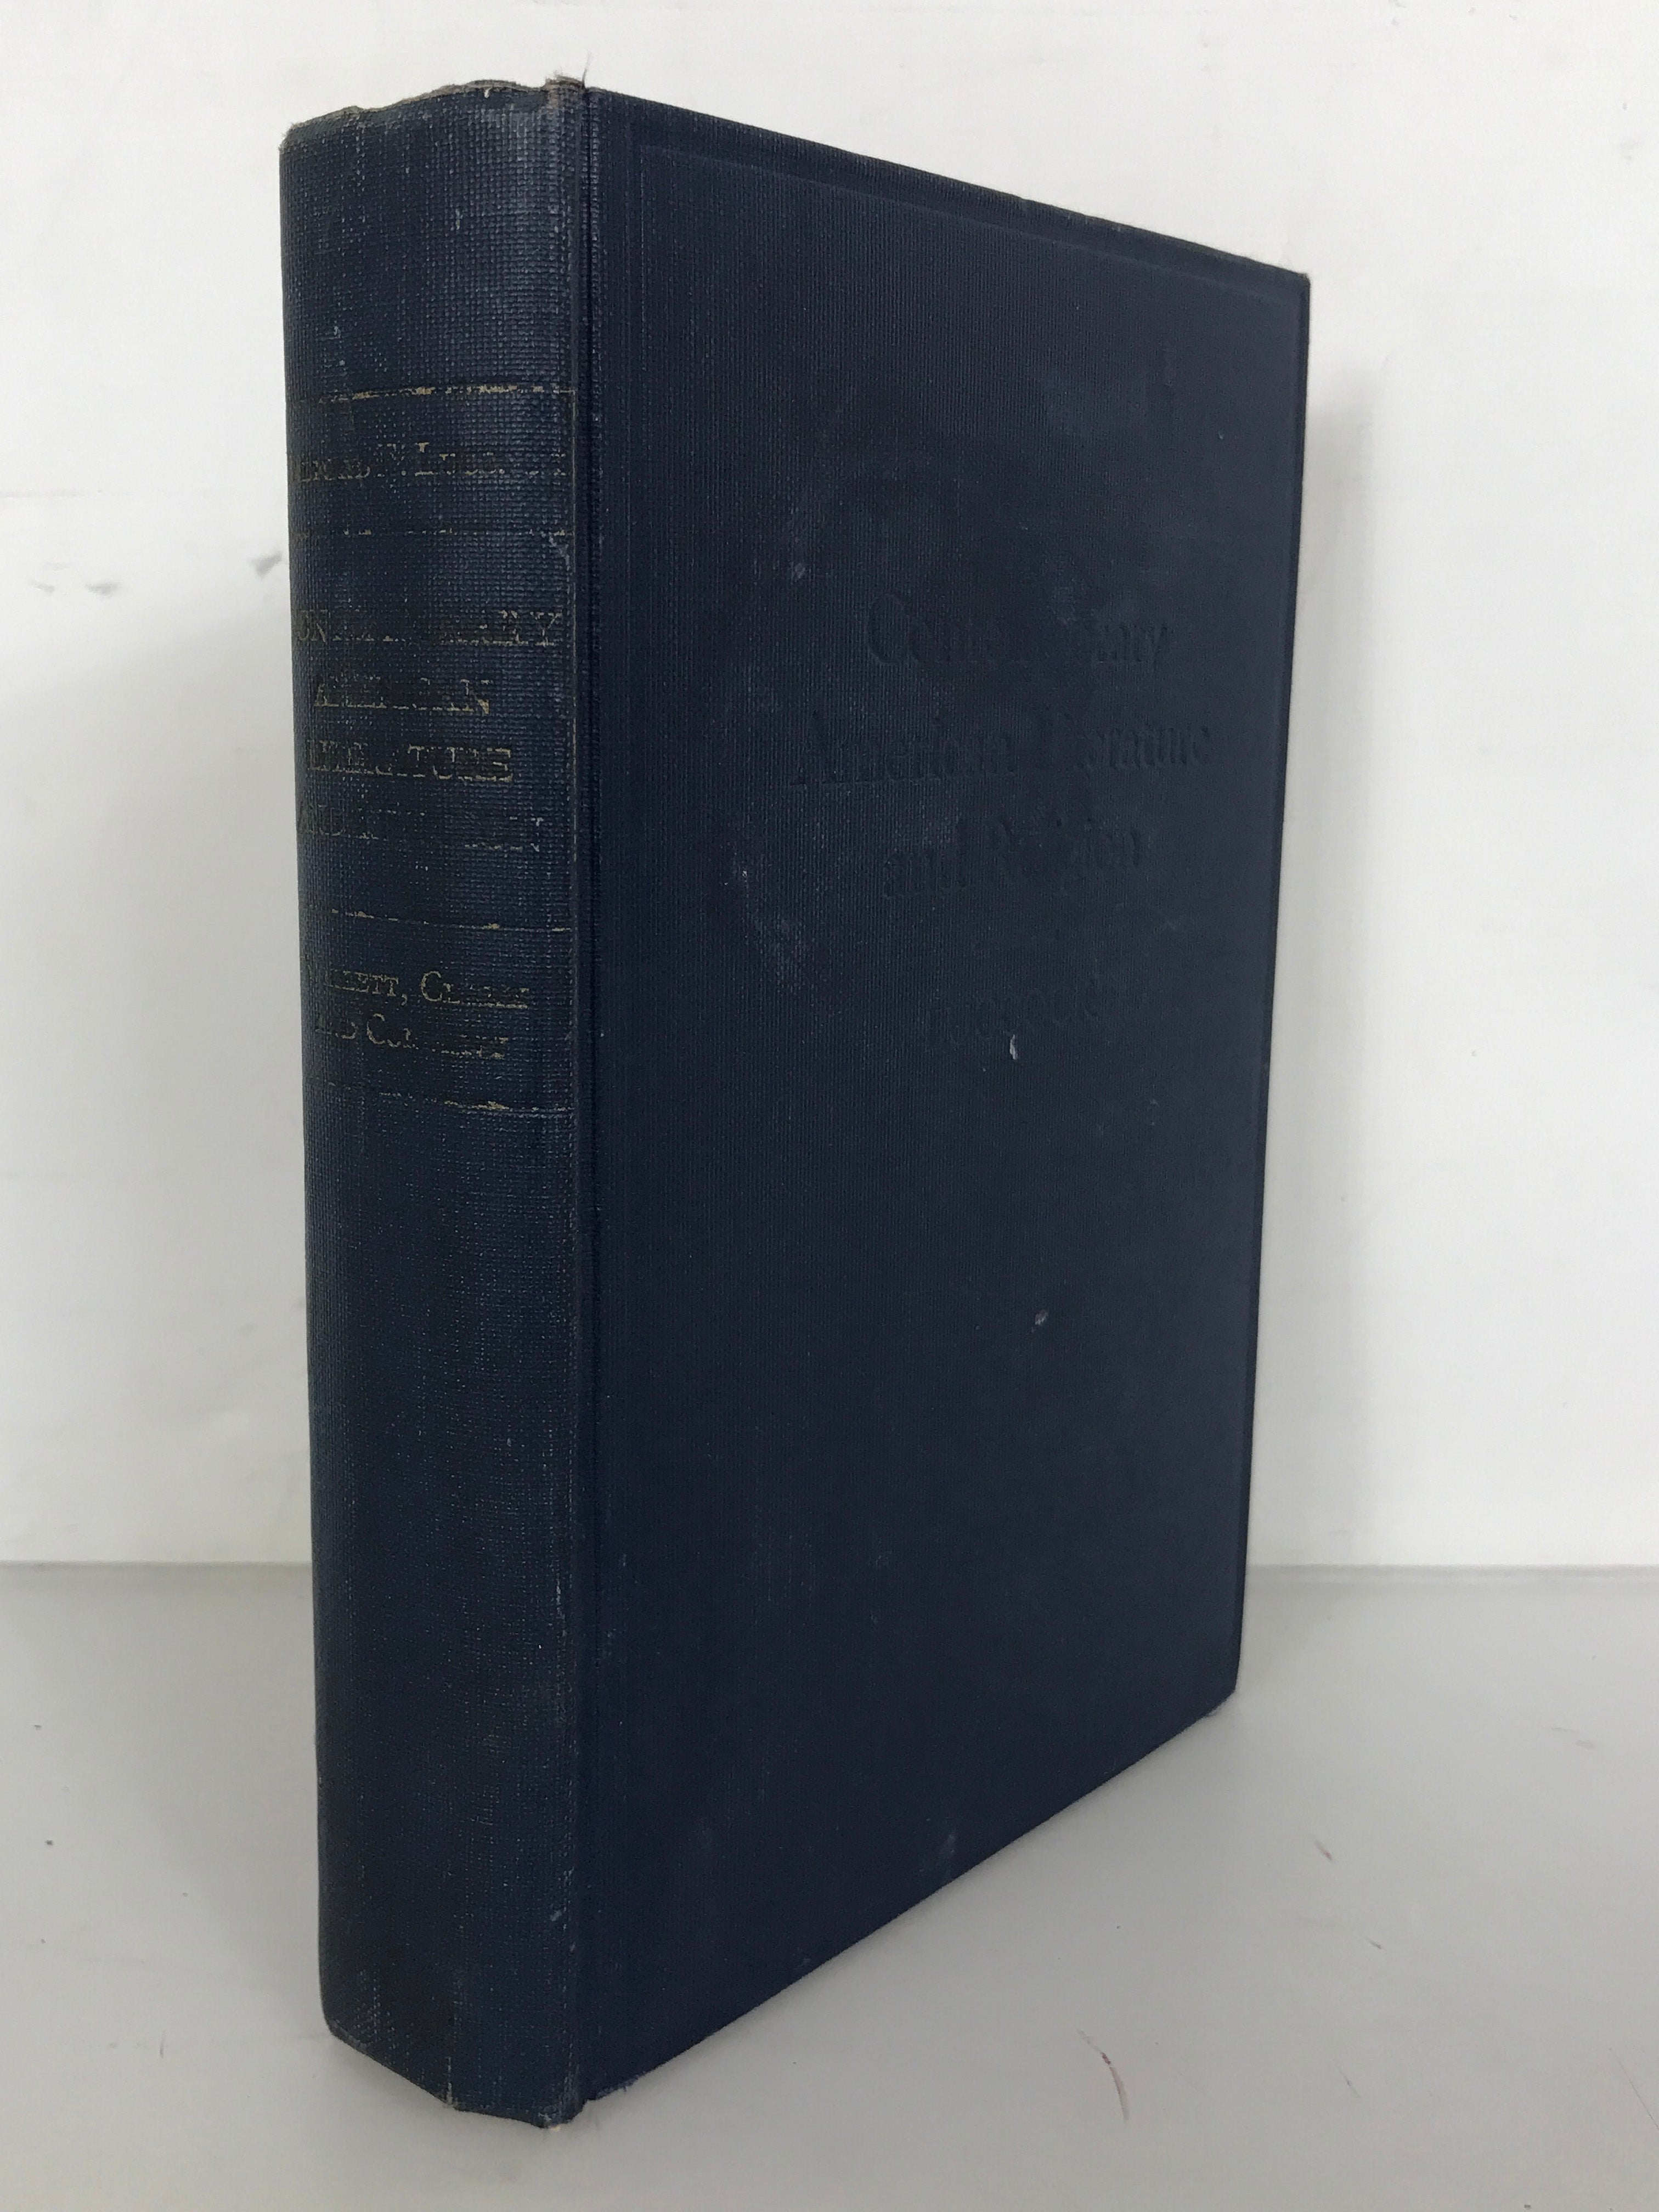 Contemporary American Literature and Religion by Halford Luccock 1934 HC